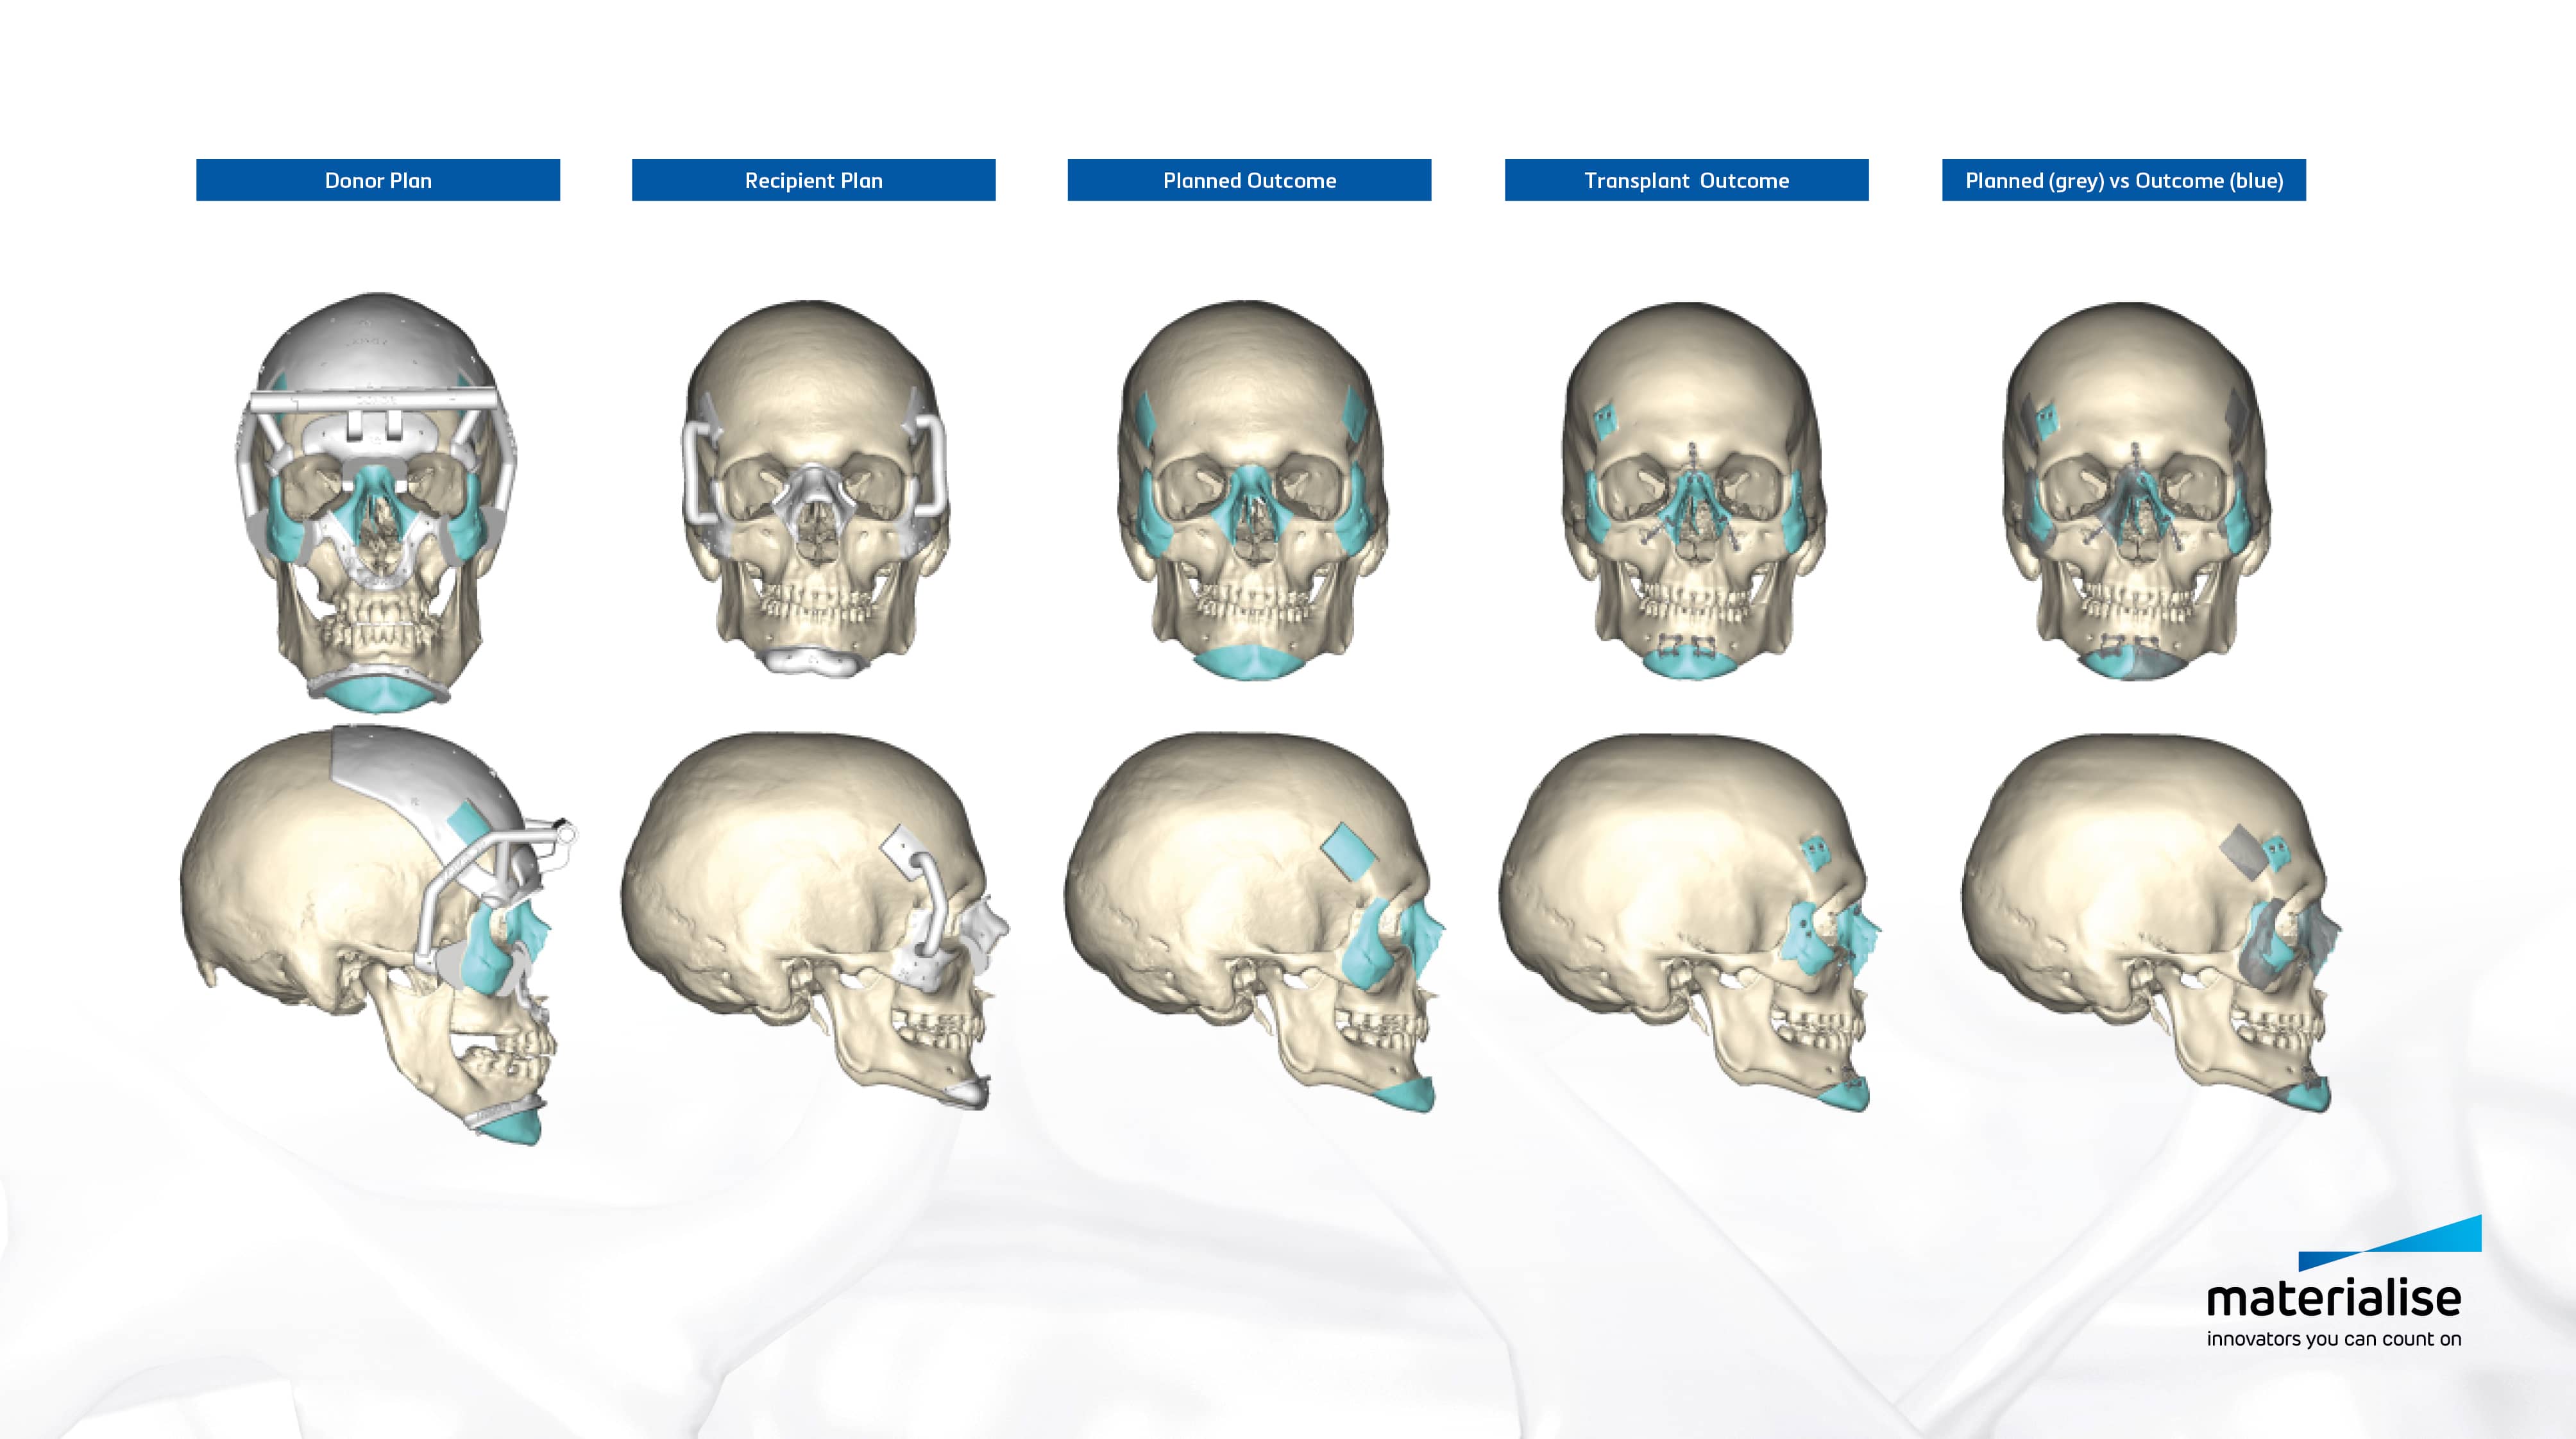 3D scans of a human skull from different perspective with medical implants